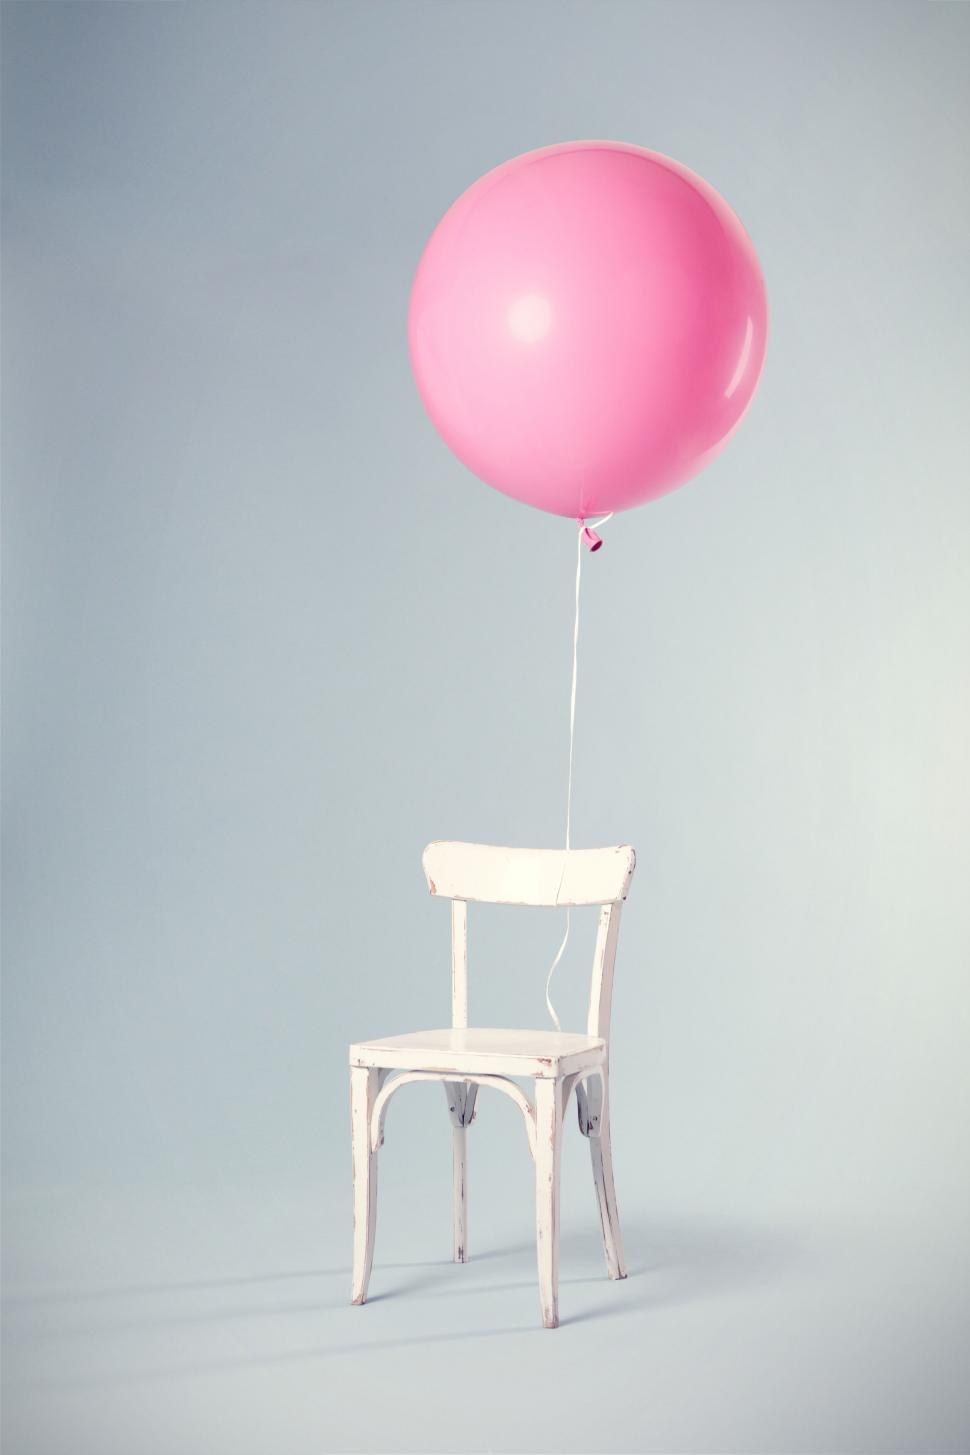 Free Image of Pink balloon tied to a white chair 